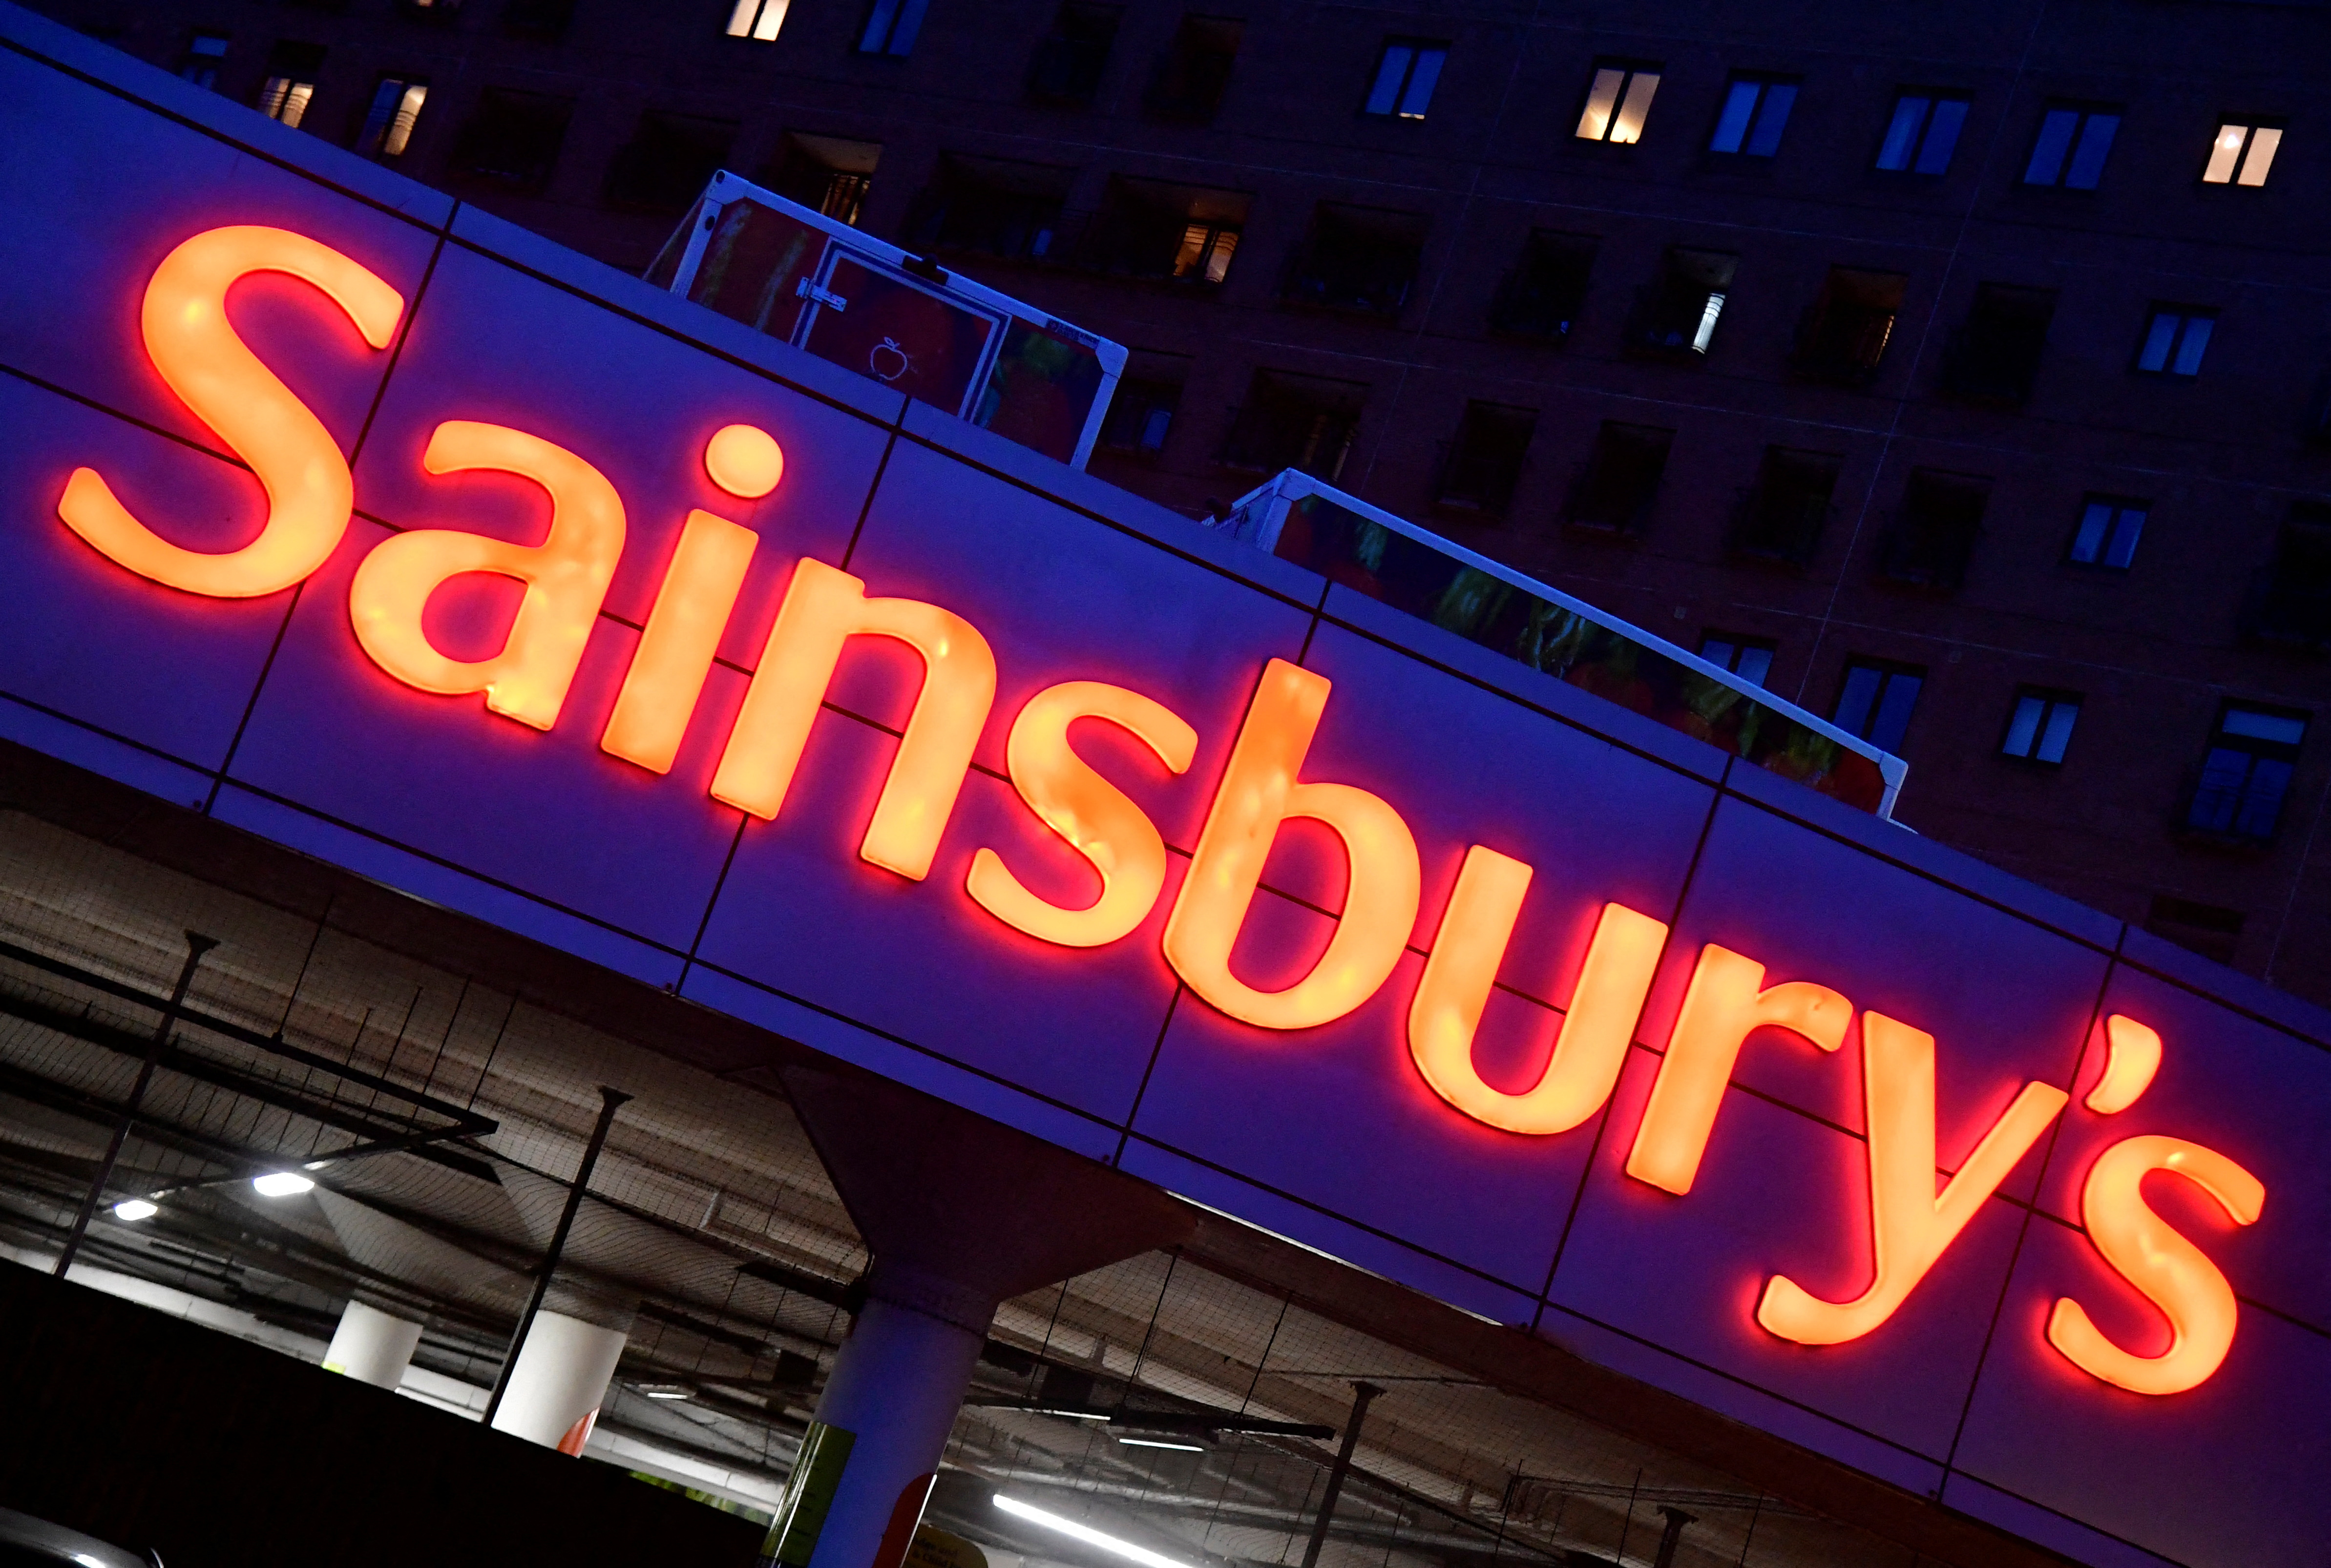 UK's Sainsbury's agrees 500 mln stg sale of stores to LXi REIT